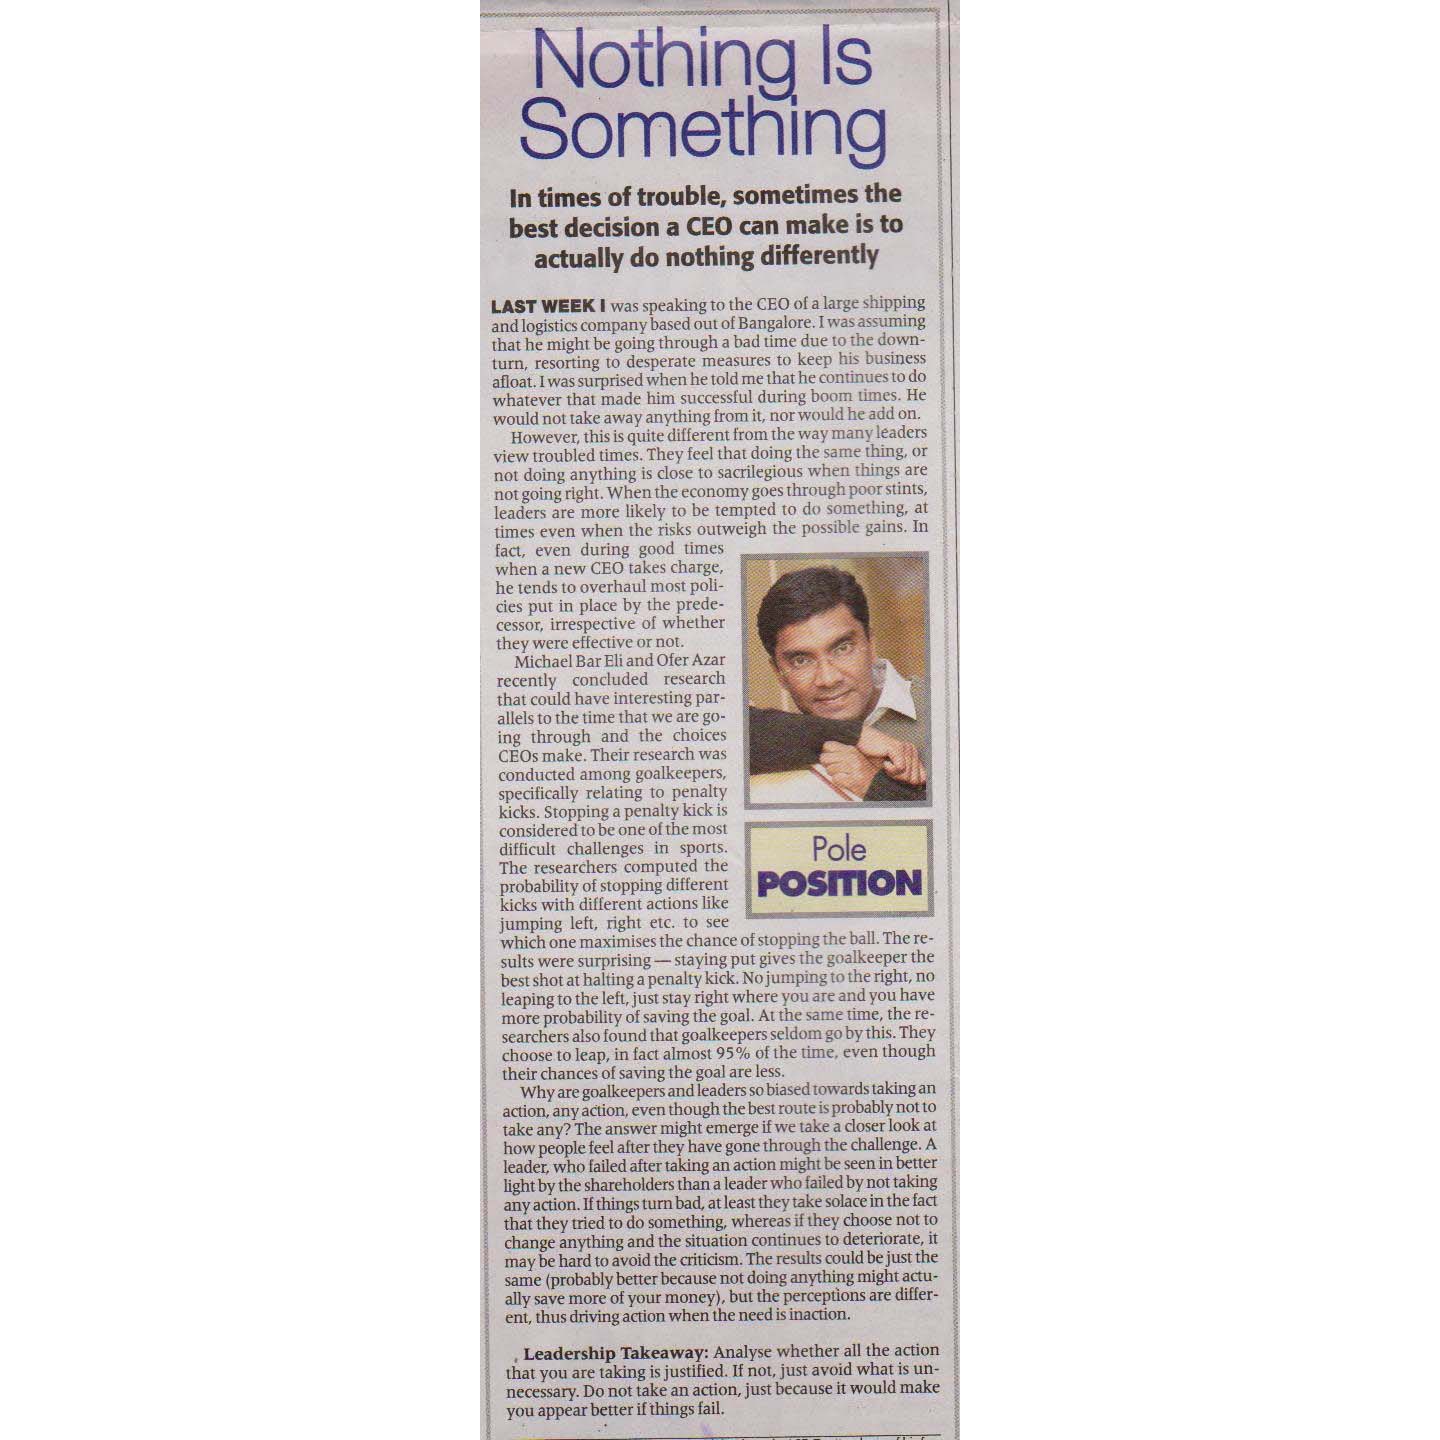 The Economic Times 13 March 2009